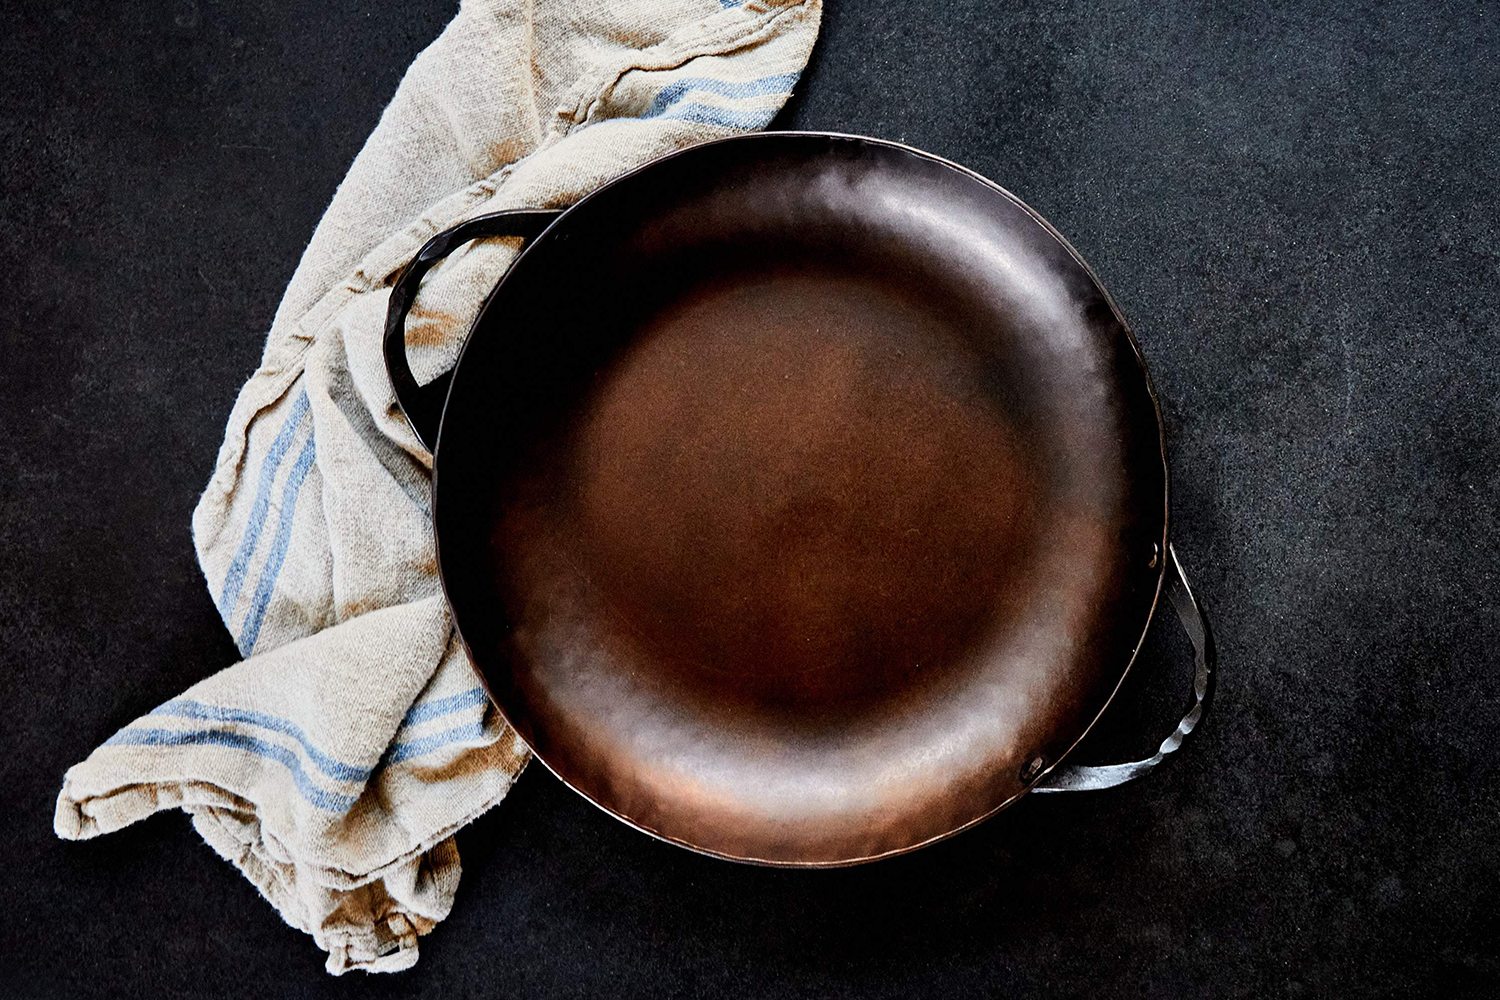 The Carbon Steel Round Roaster Pan from Smithey sitting next to a towel